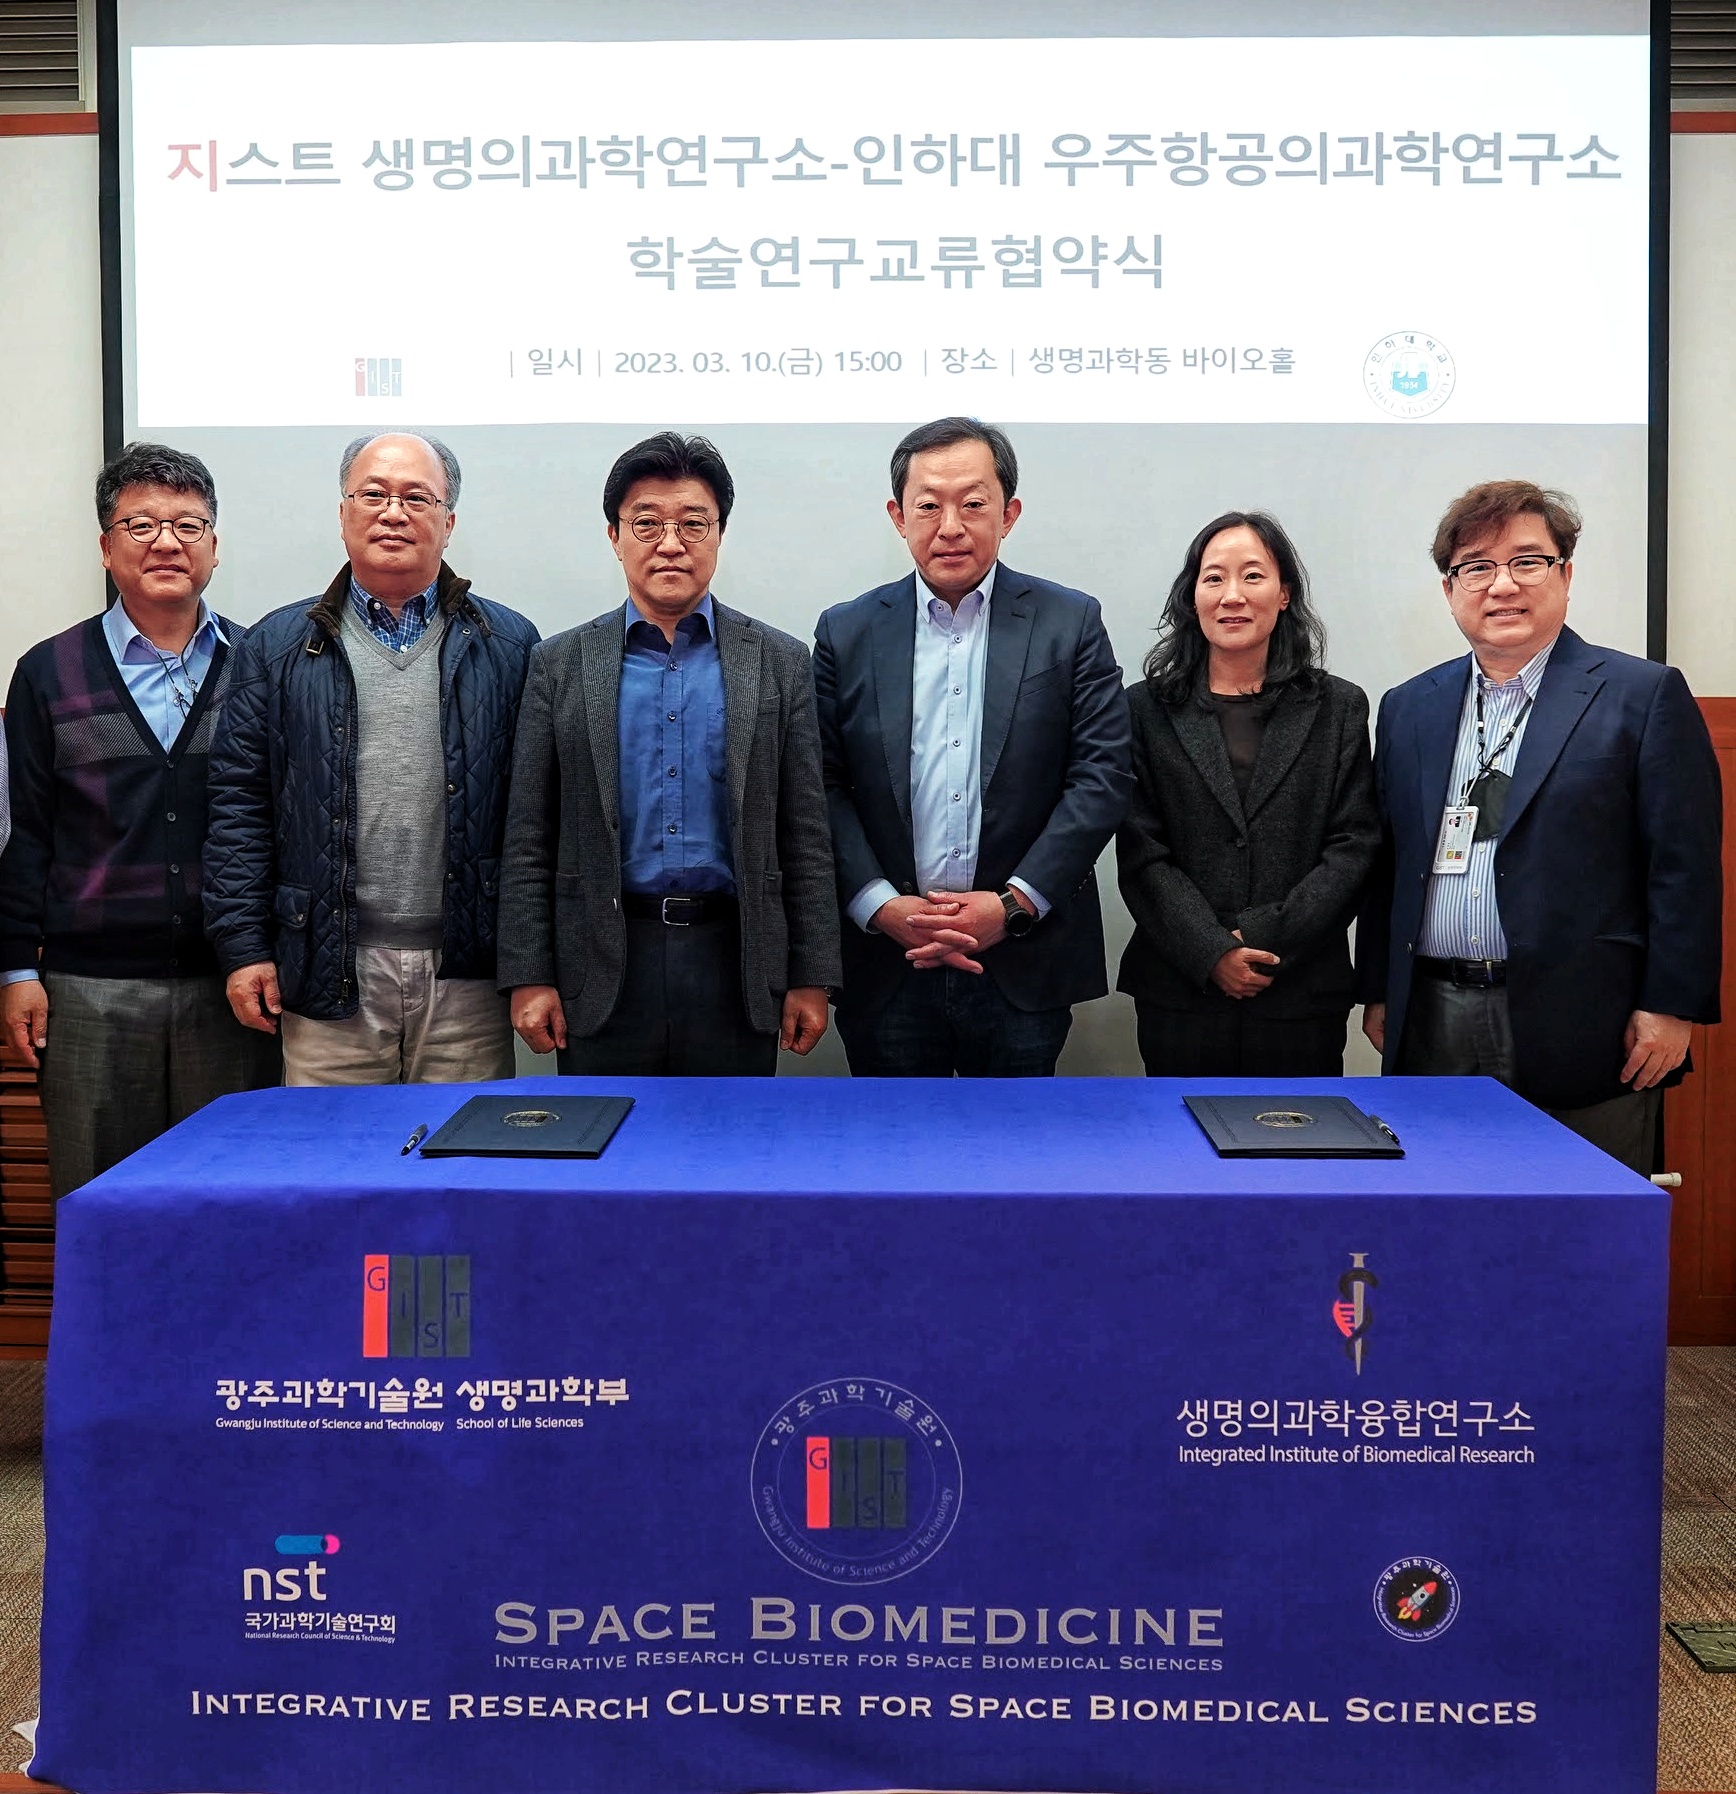 GIST and Inha University team up to respond to the manned space age 이미지